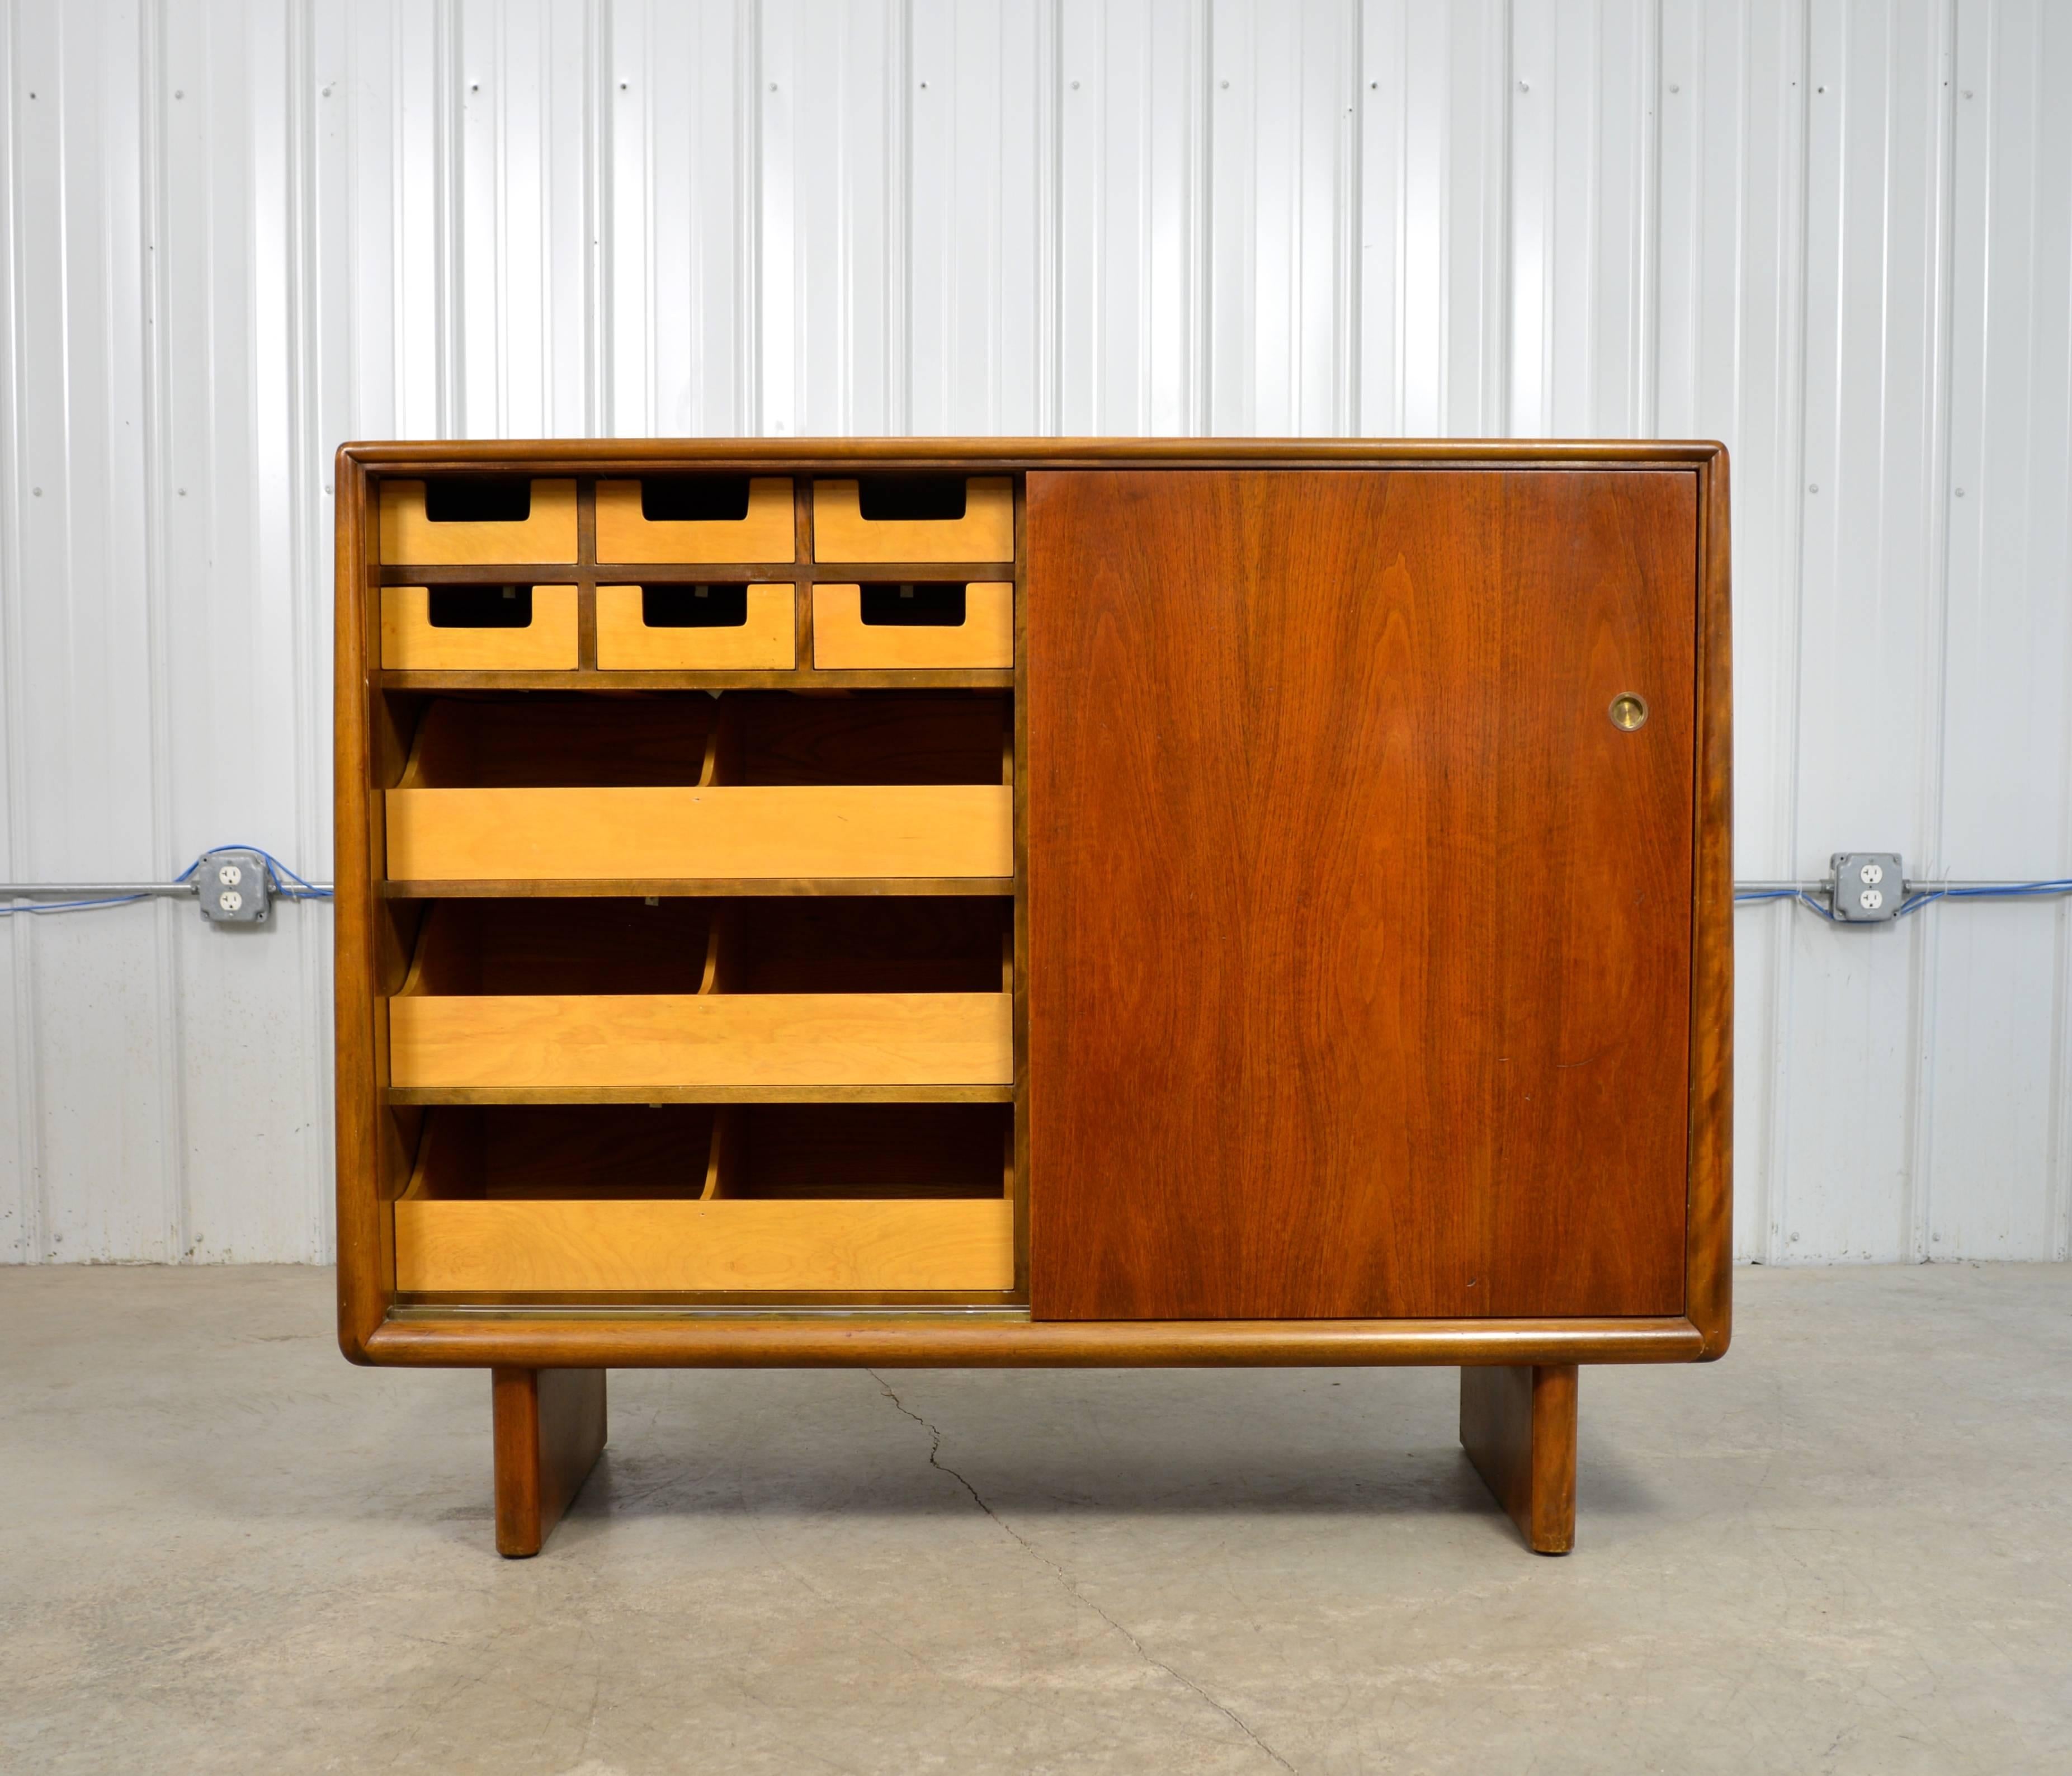 A large gentleman's chest in walnut designed by T.H. Robsjohn Gibbings for Widdicomb.  Unique tapered edges frame this piece.  Sliding doors reveal ample storage space.  Labeled.